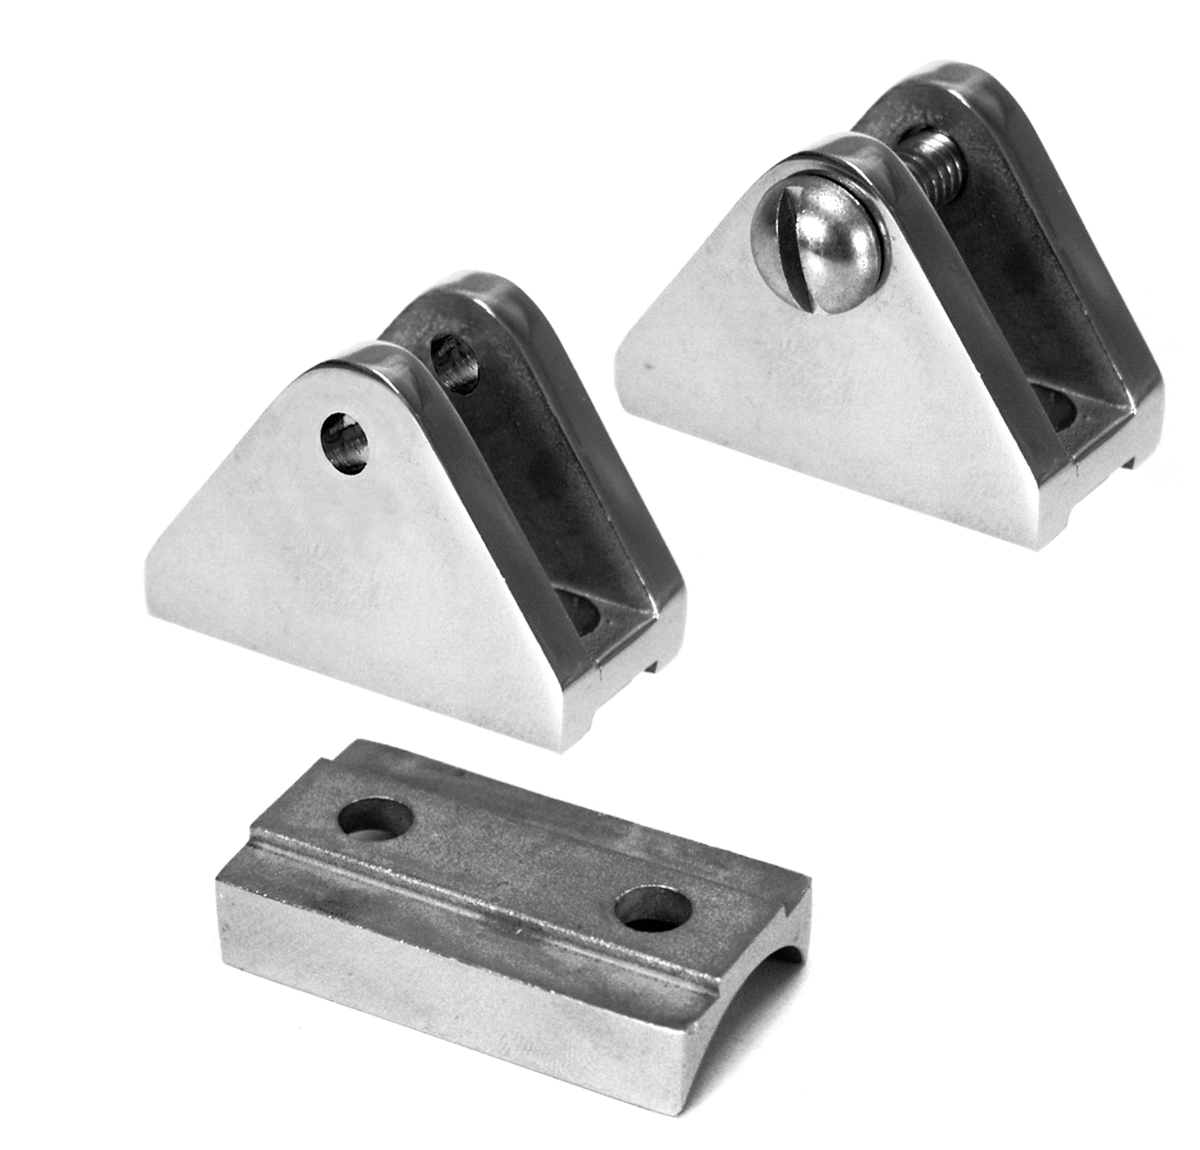 Deck Hinge Flat Base with Hidden Screws - Stainless Steel Marine and Boat Top Hardware Fittings